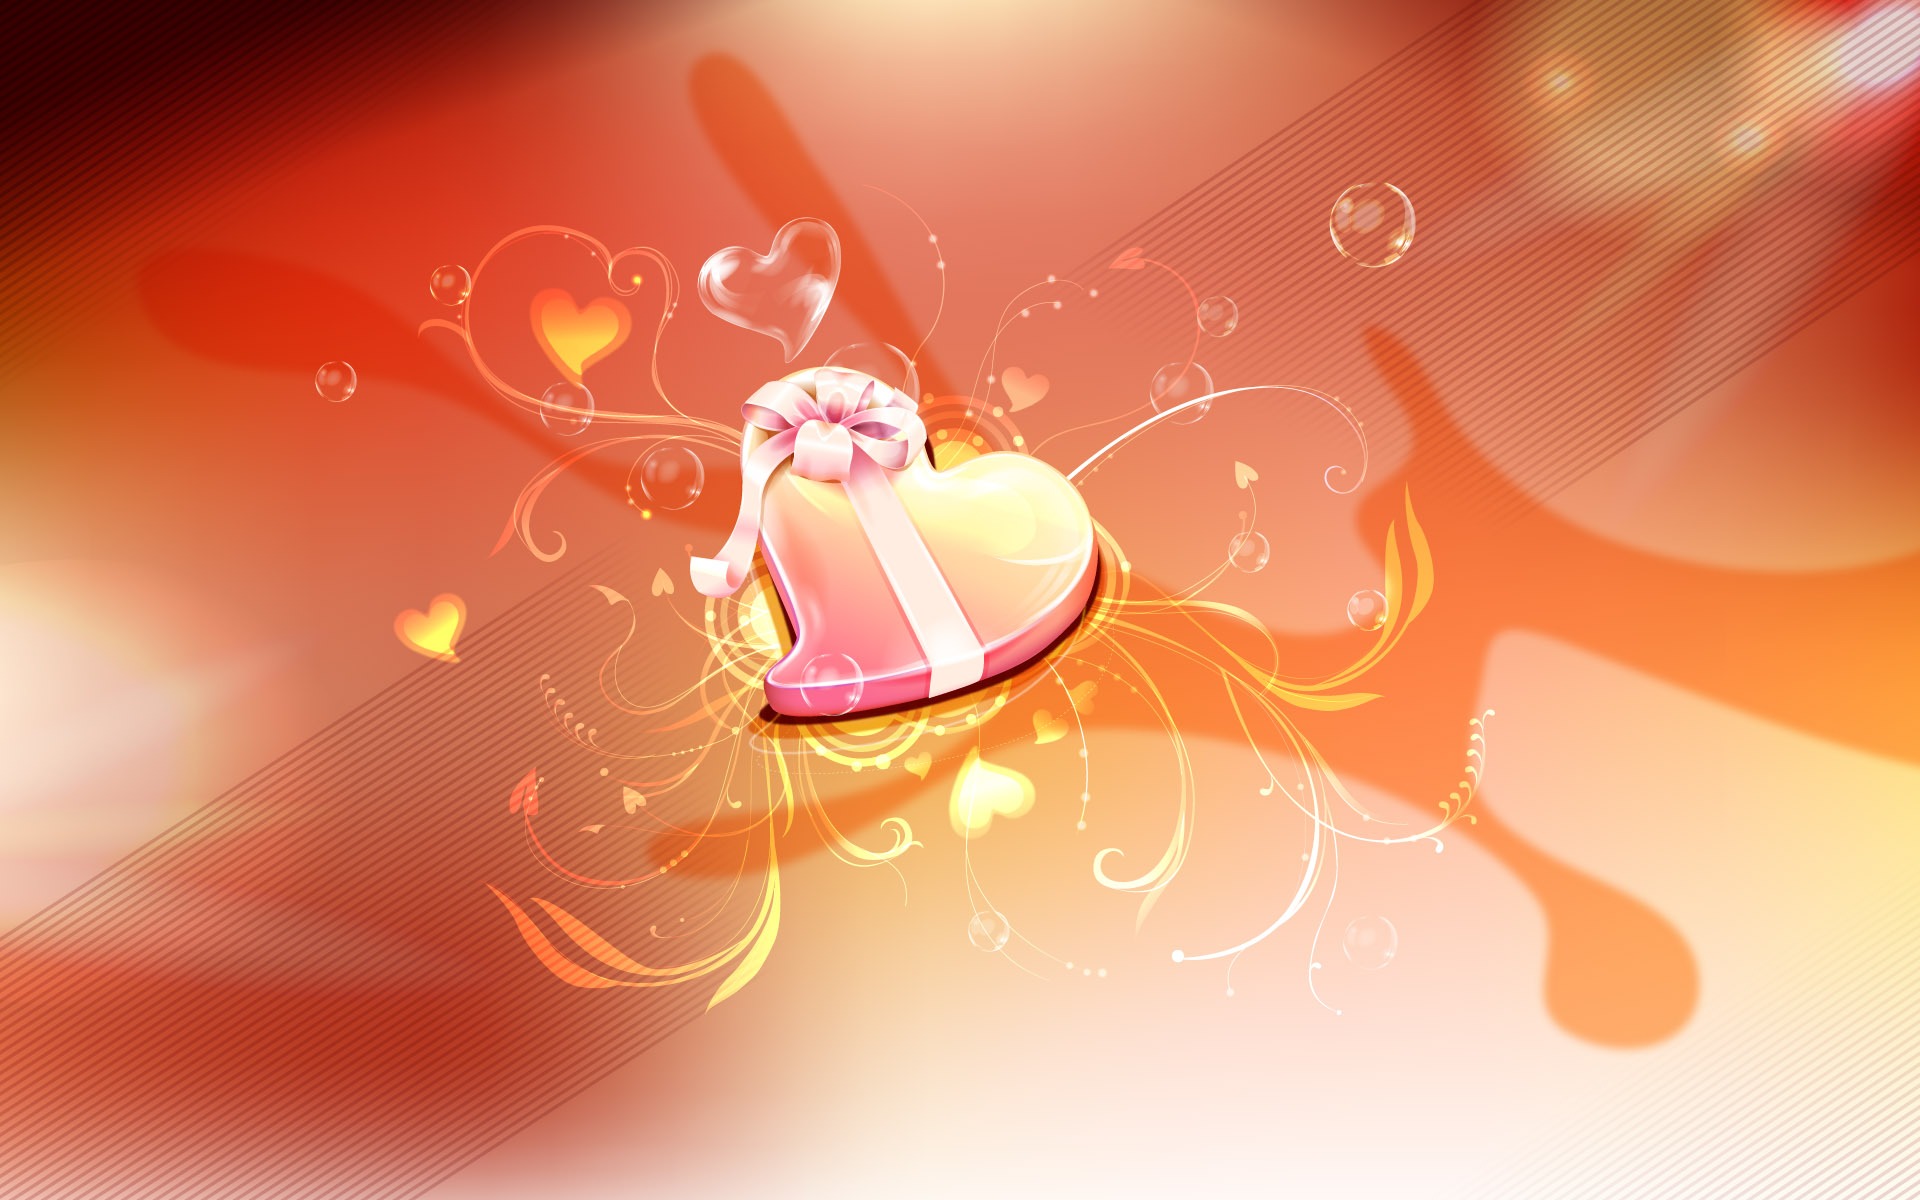 Valentine's Day Love Theme Wallpapers (2) #11 - 1920x1200